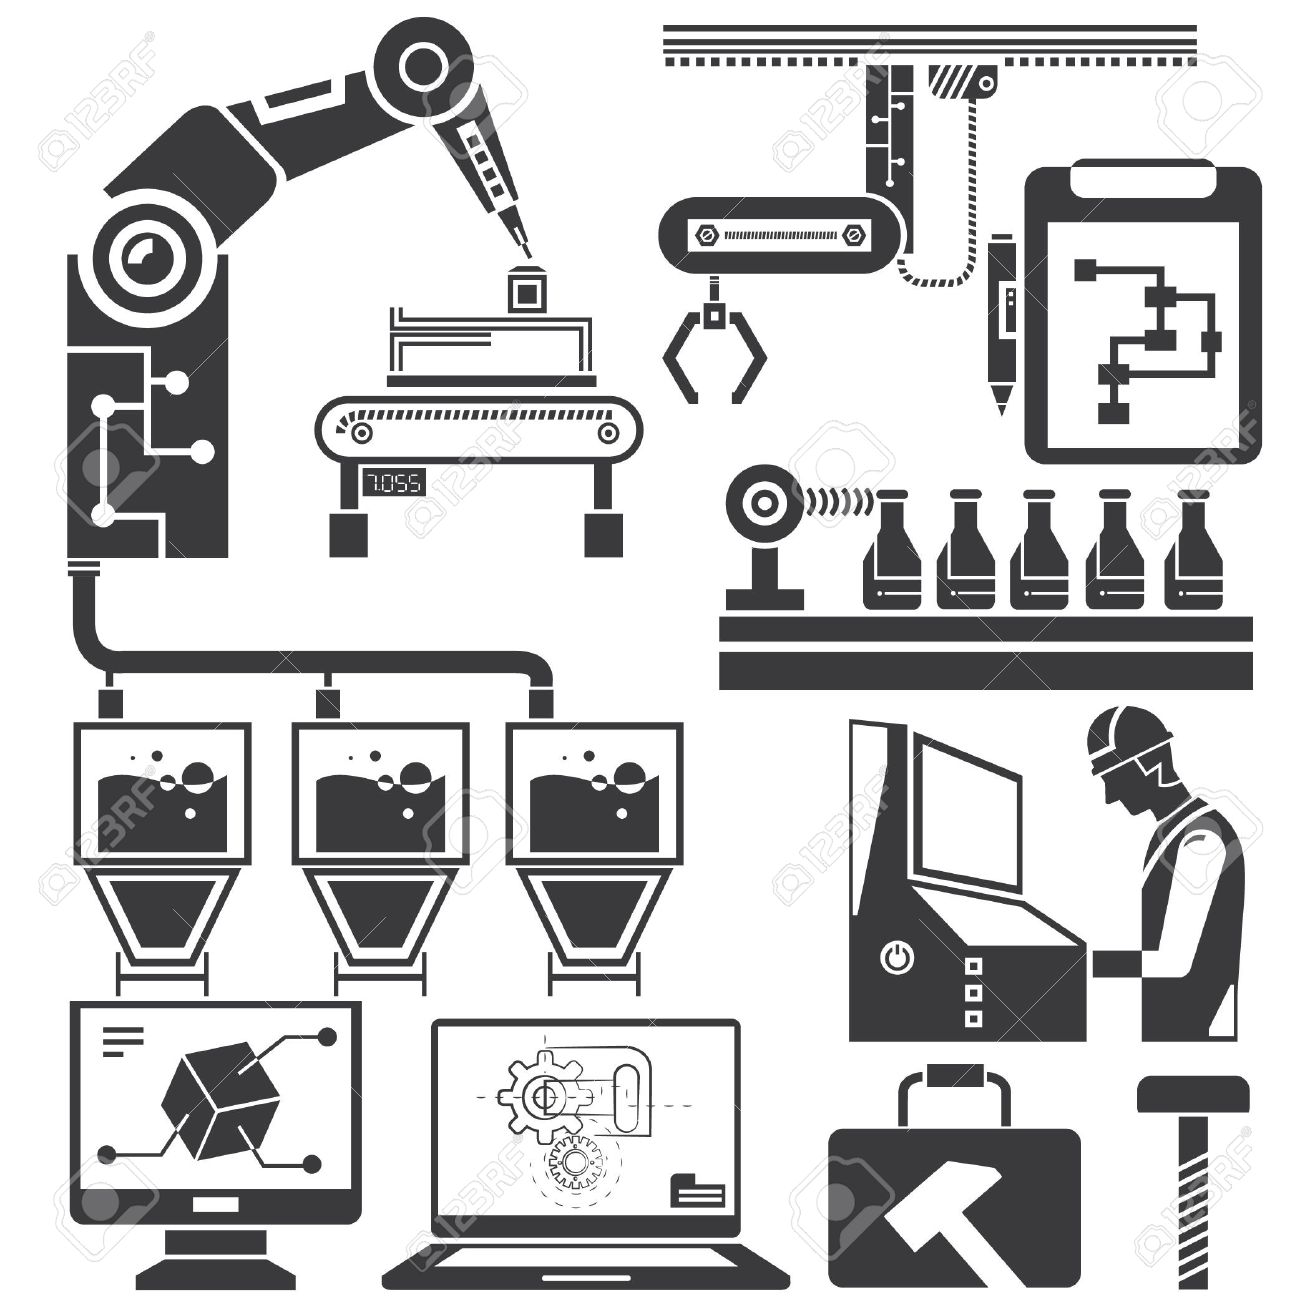 Production Line Icons by macrovector | GraphicRiver